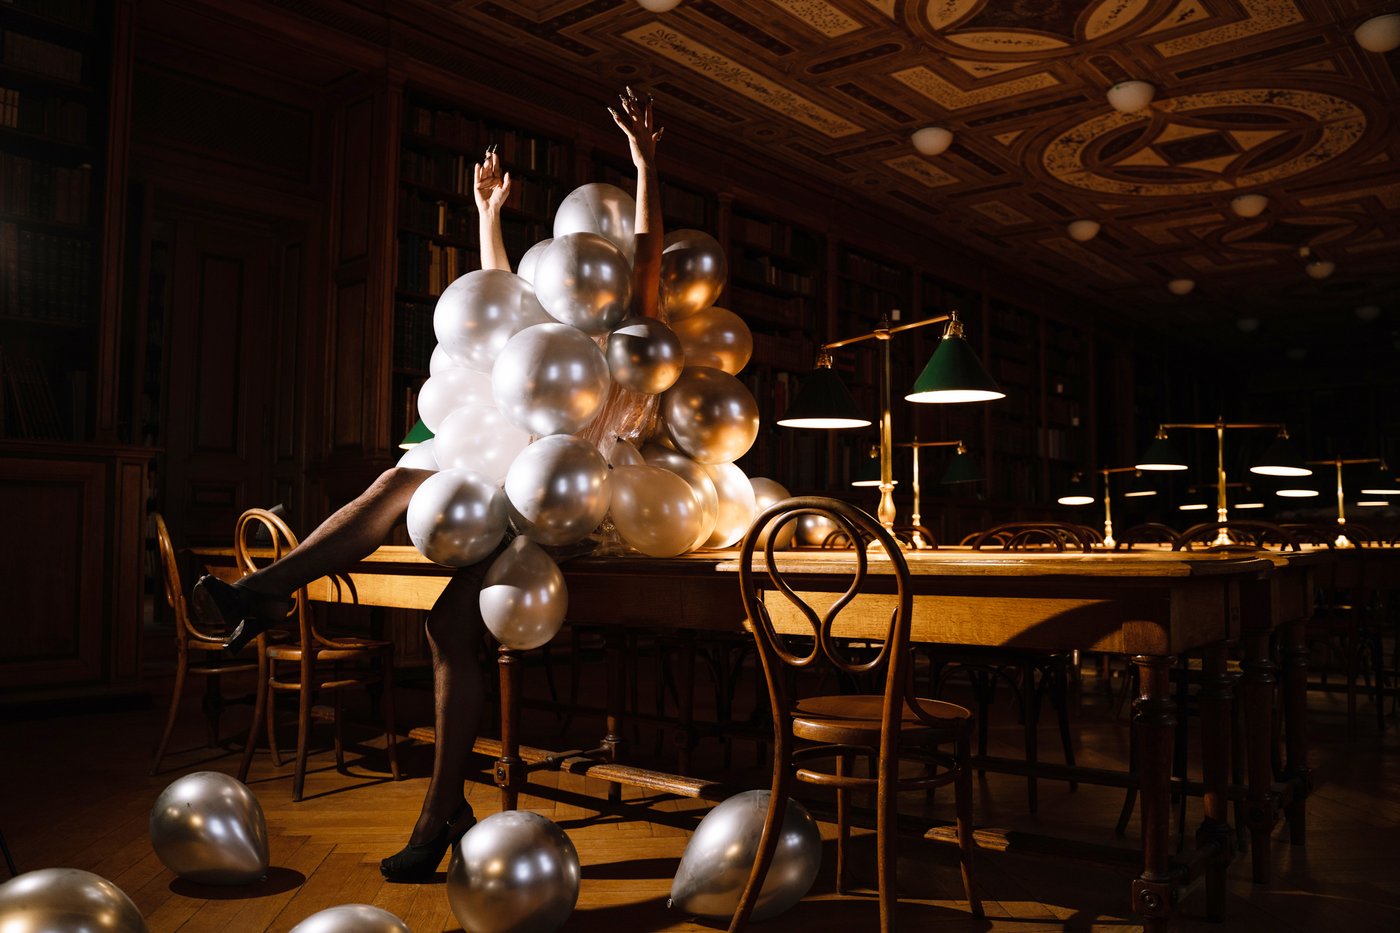 A person wrapped from head to knees in silver balloons sits on a table in the reading room. Except for the glow of the green lampshades, the room is dark. The person is wearing black high heels, one leg is raised. The arms with pointed long fingernails point upwards.